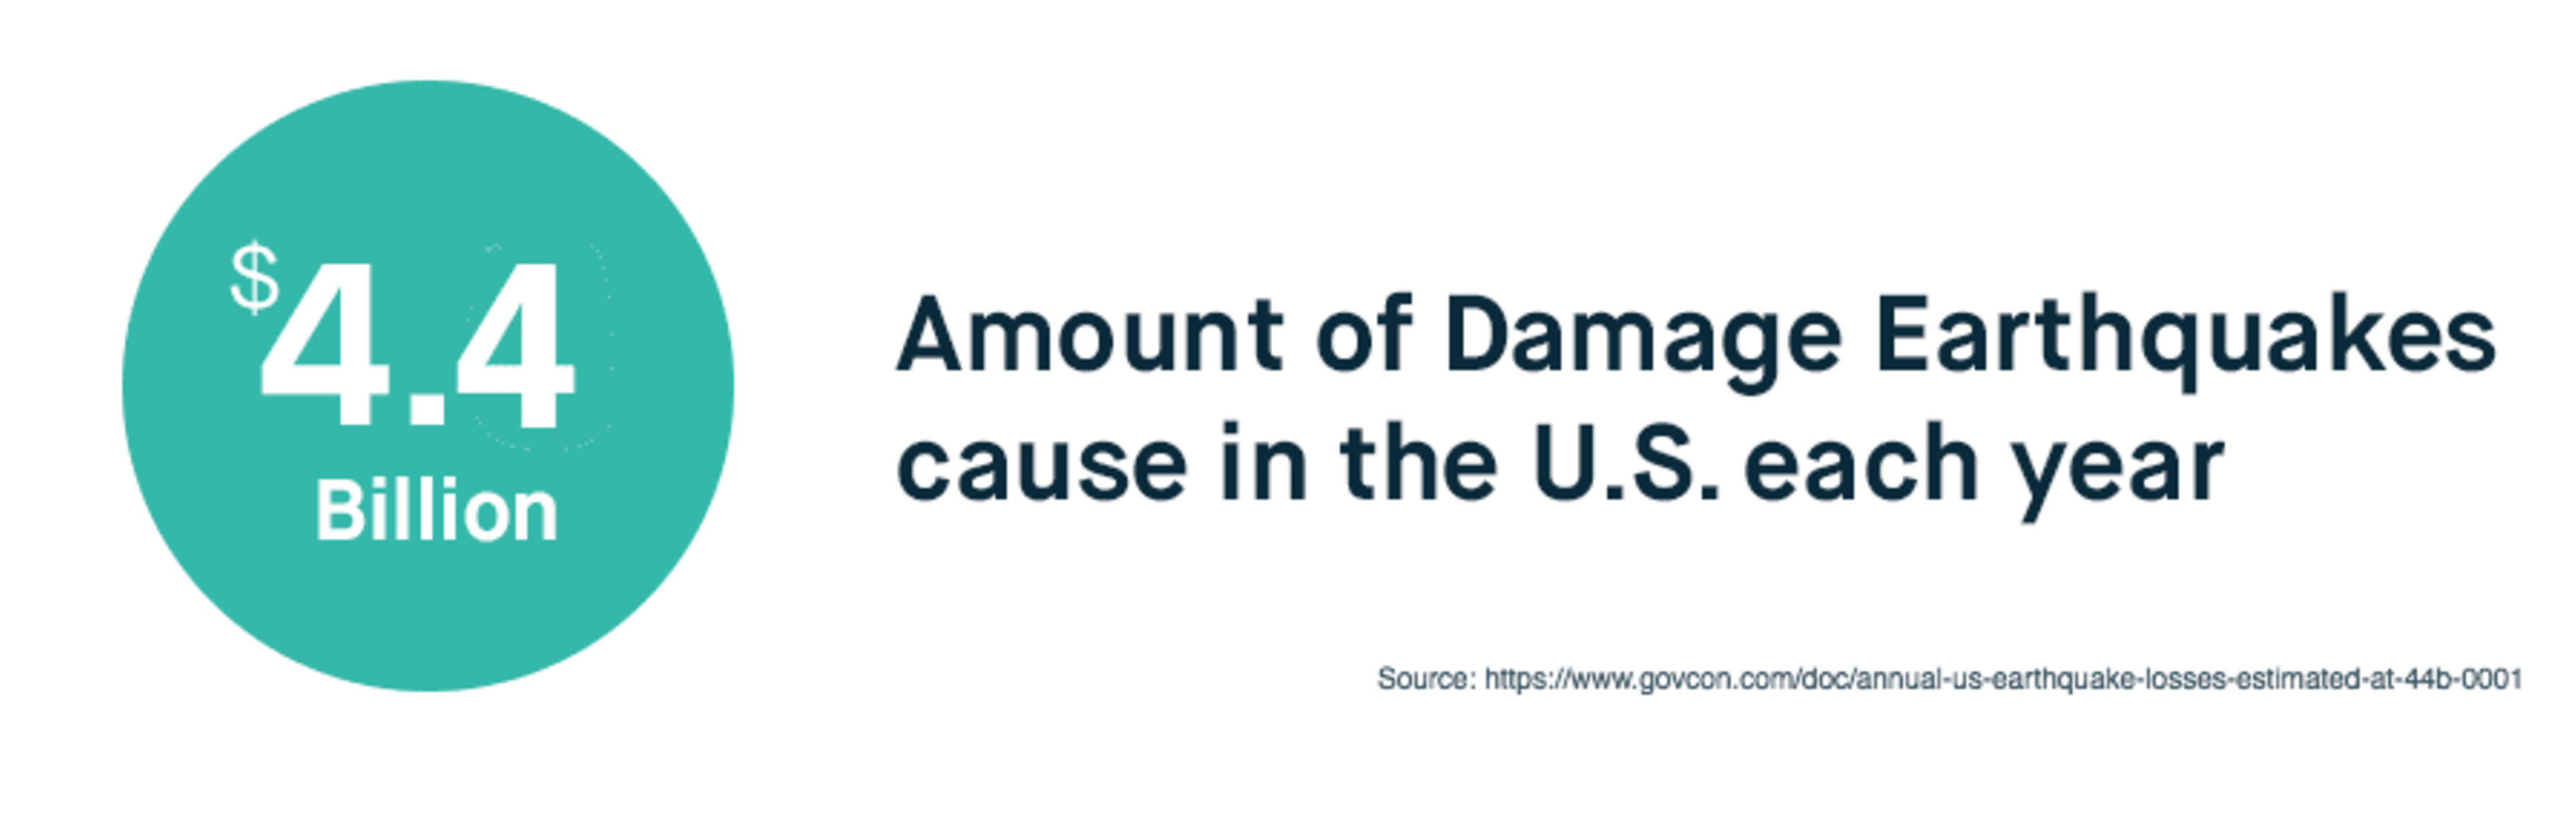 Amount of Damaged Caused by Earthquakes